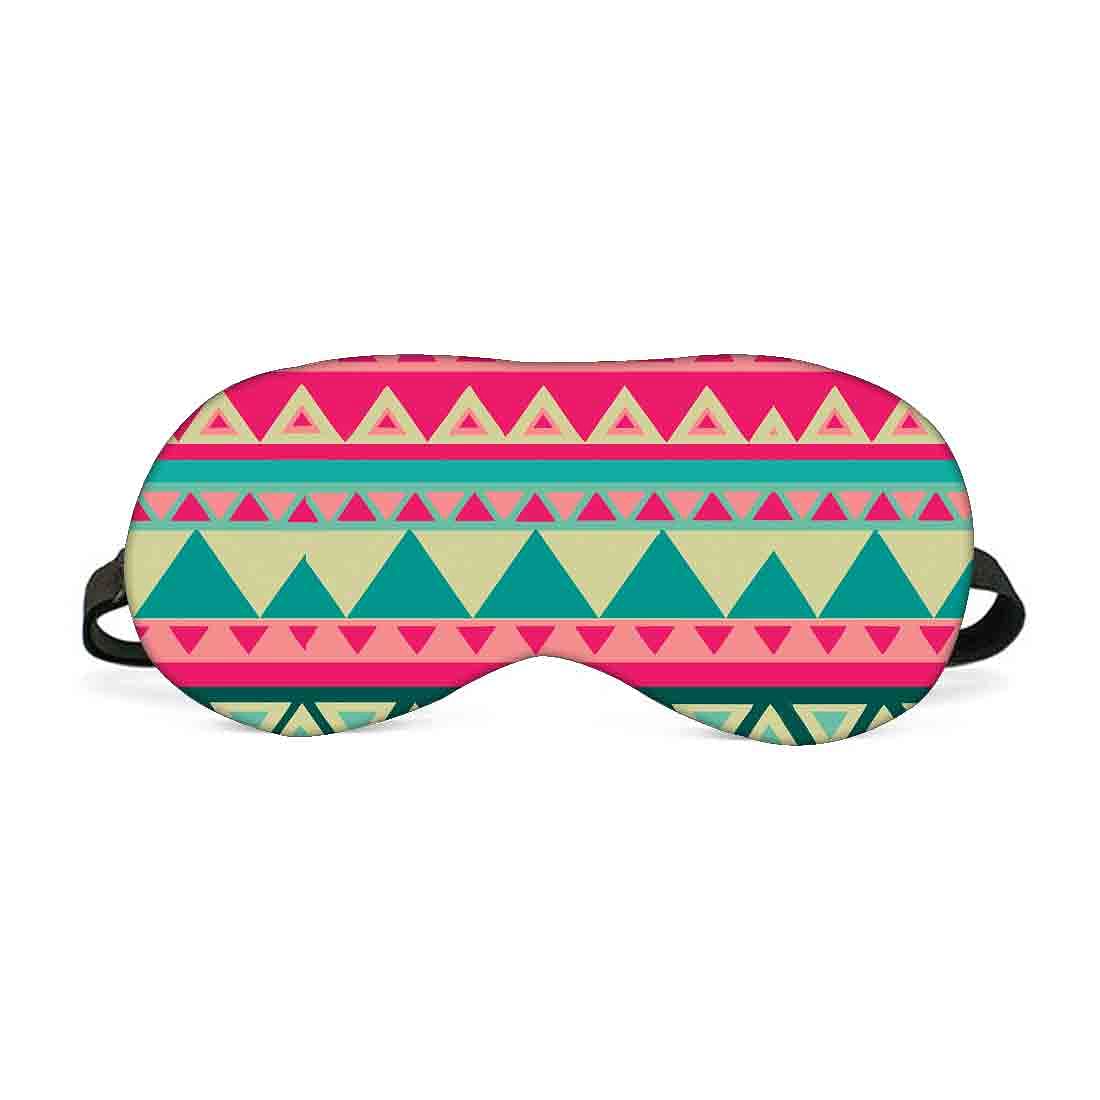 Designer Travel Eye Mask for Sleeping - Party flags - Made in India Nutcase